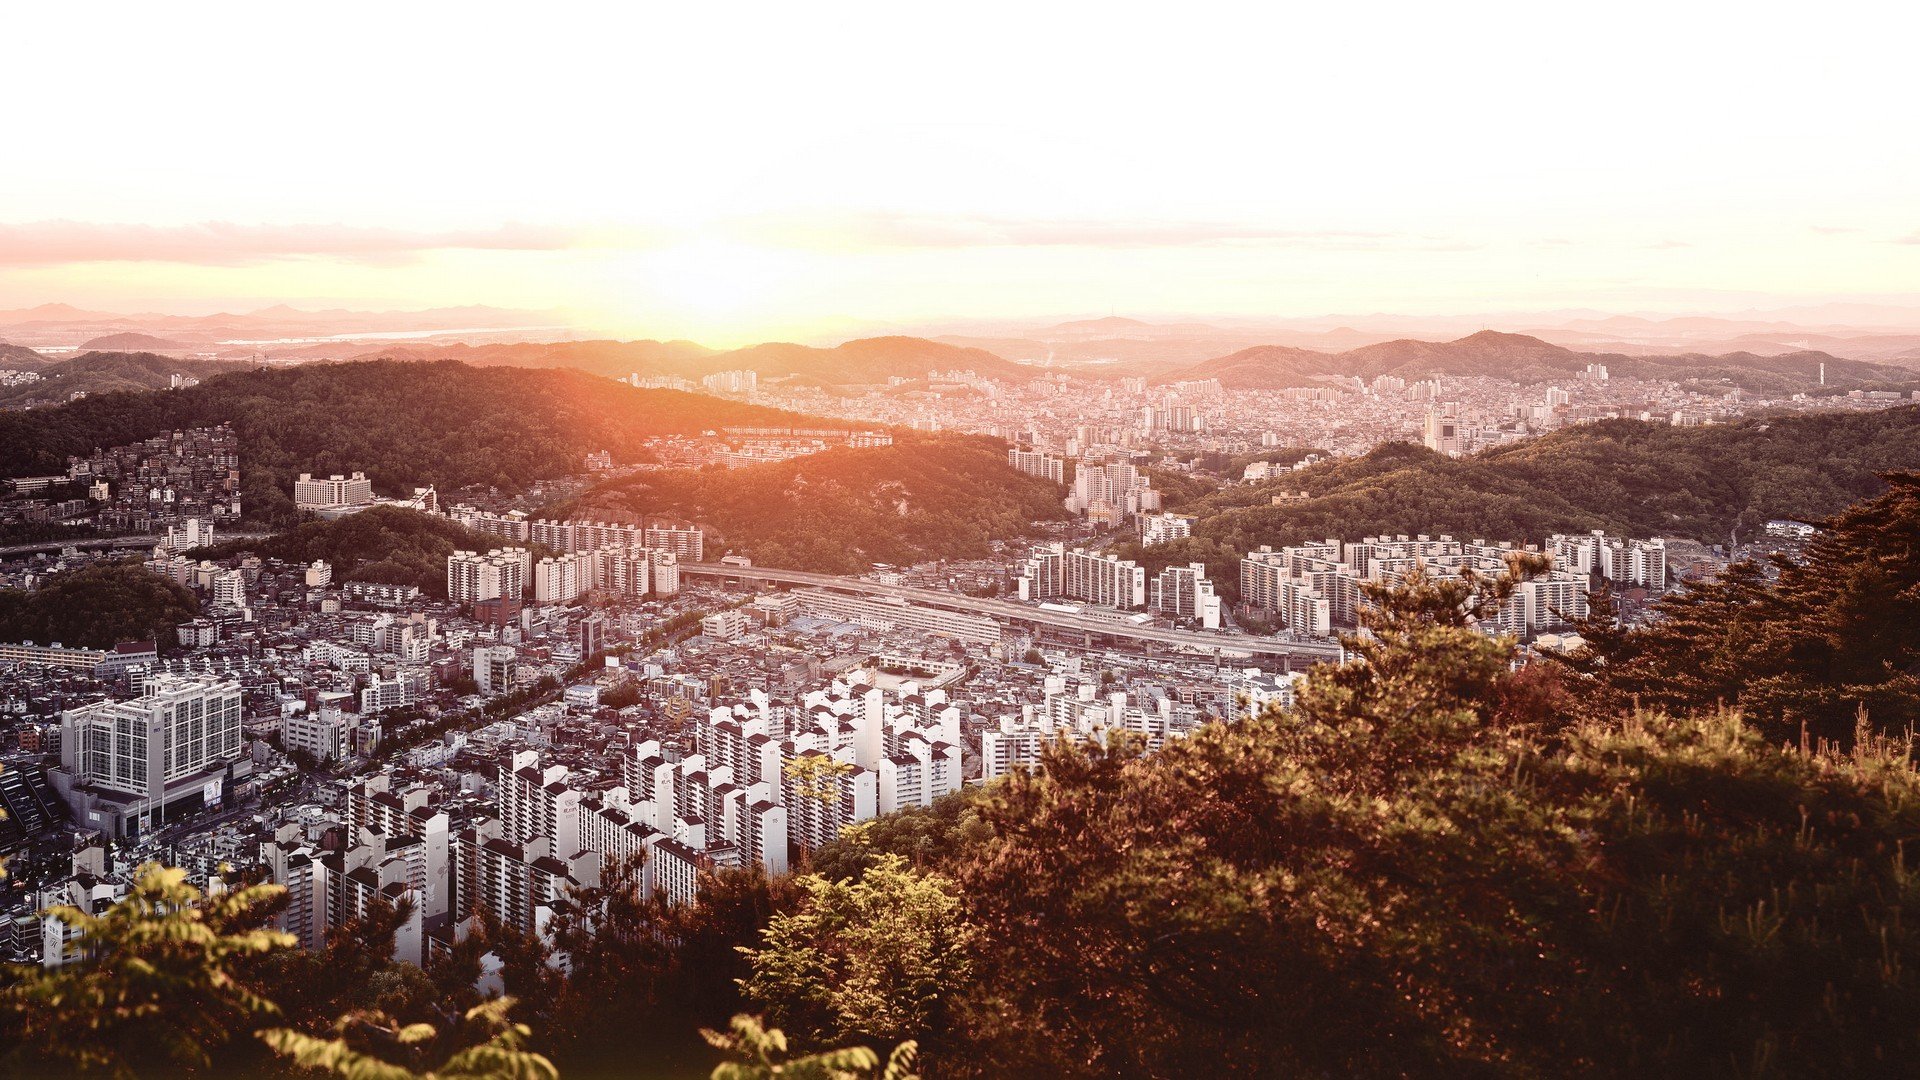 cityscapes, Skylines, Buildings, Skyscrapers, Asians, Asia, Asian, Architecture, Seoul, City, Skyline, South, Korea, Citylife Wallpaper